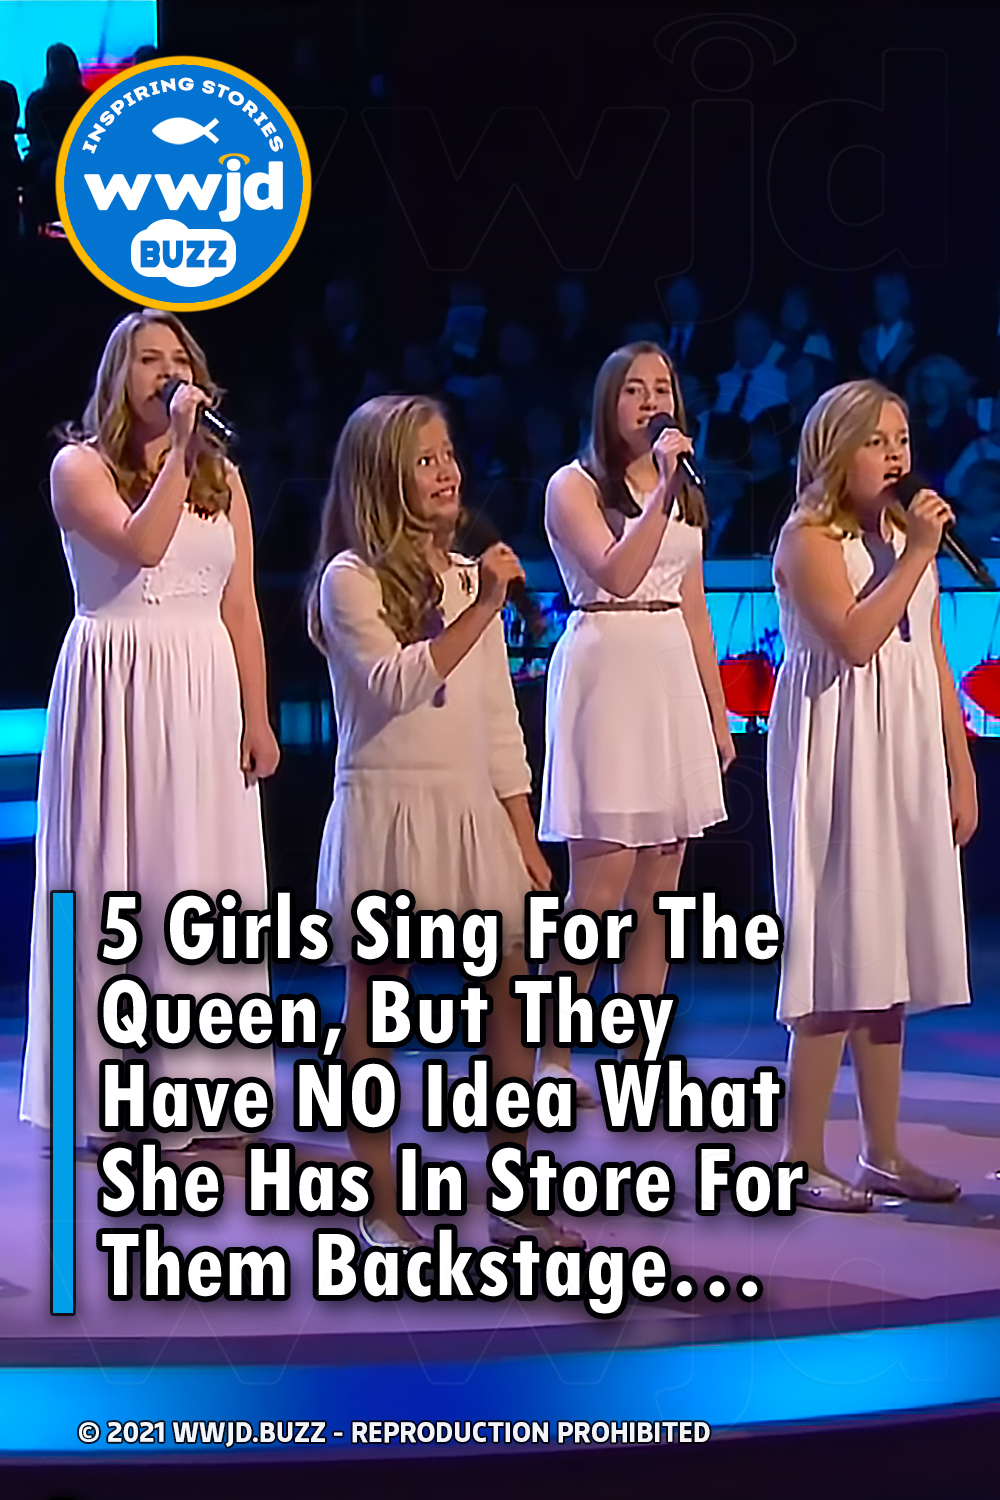 5 Girls Sing For The Queen, But They Have NO Idea What She Has In Store For Them Backstage…